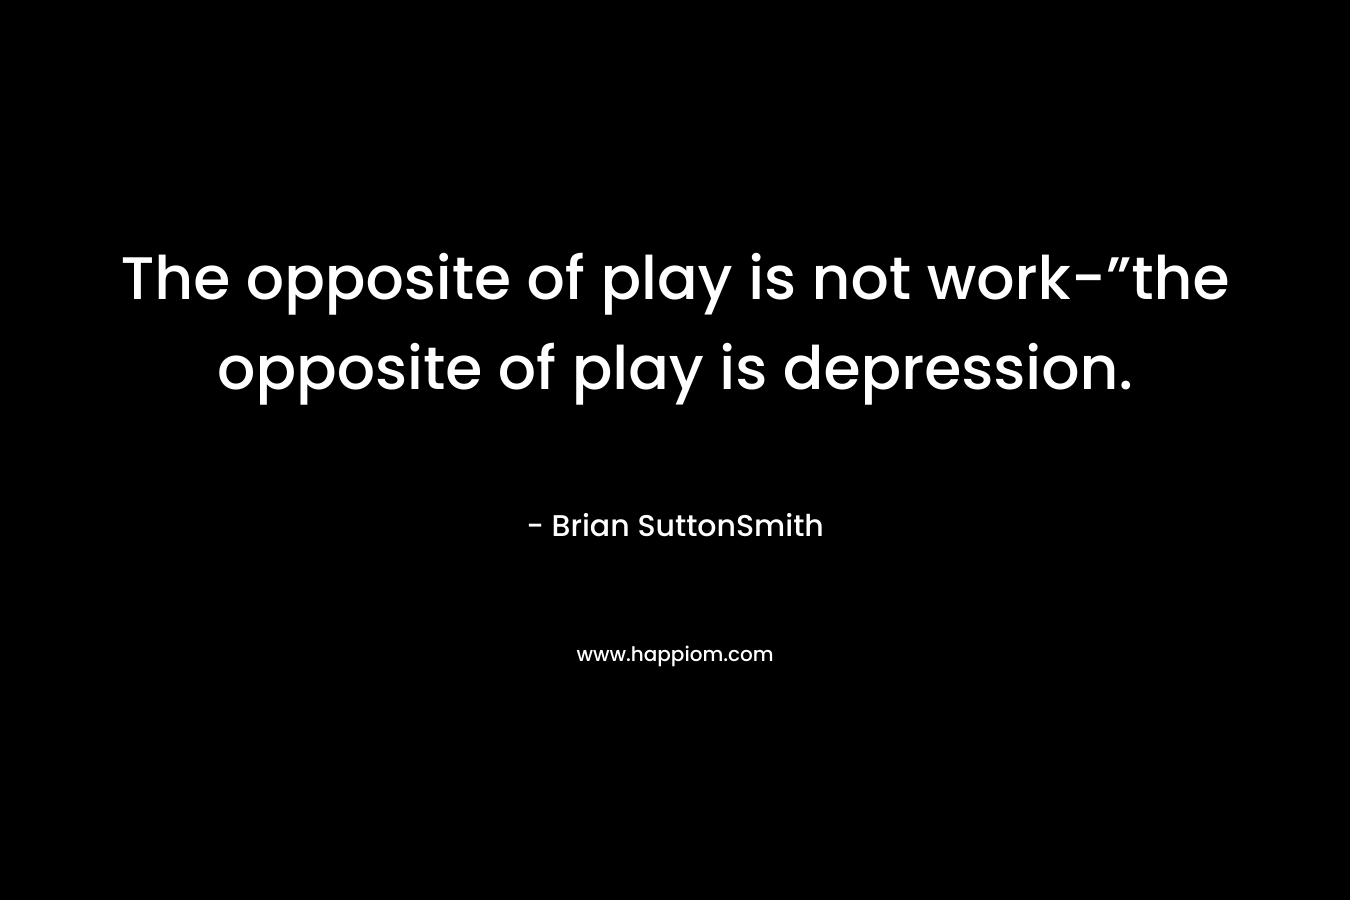 The opposite of play is not work-”the opposite of play is depression.